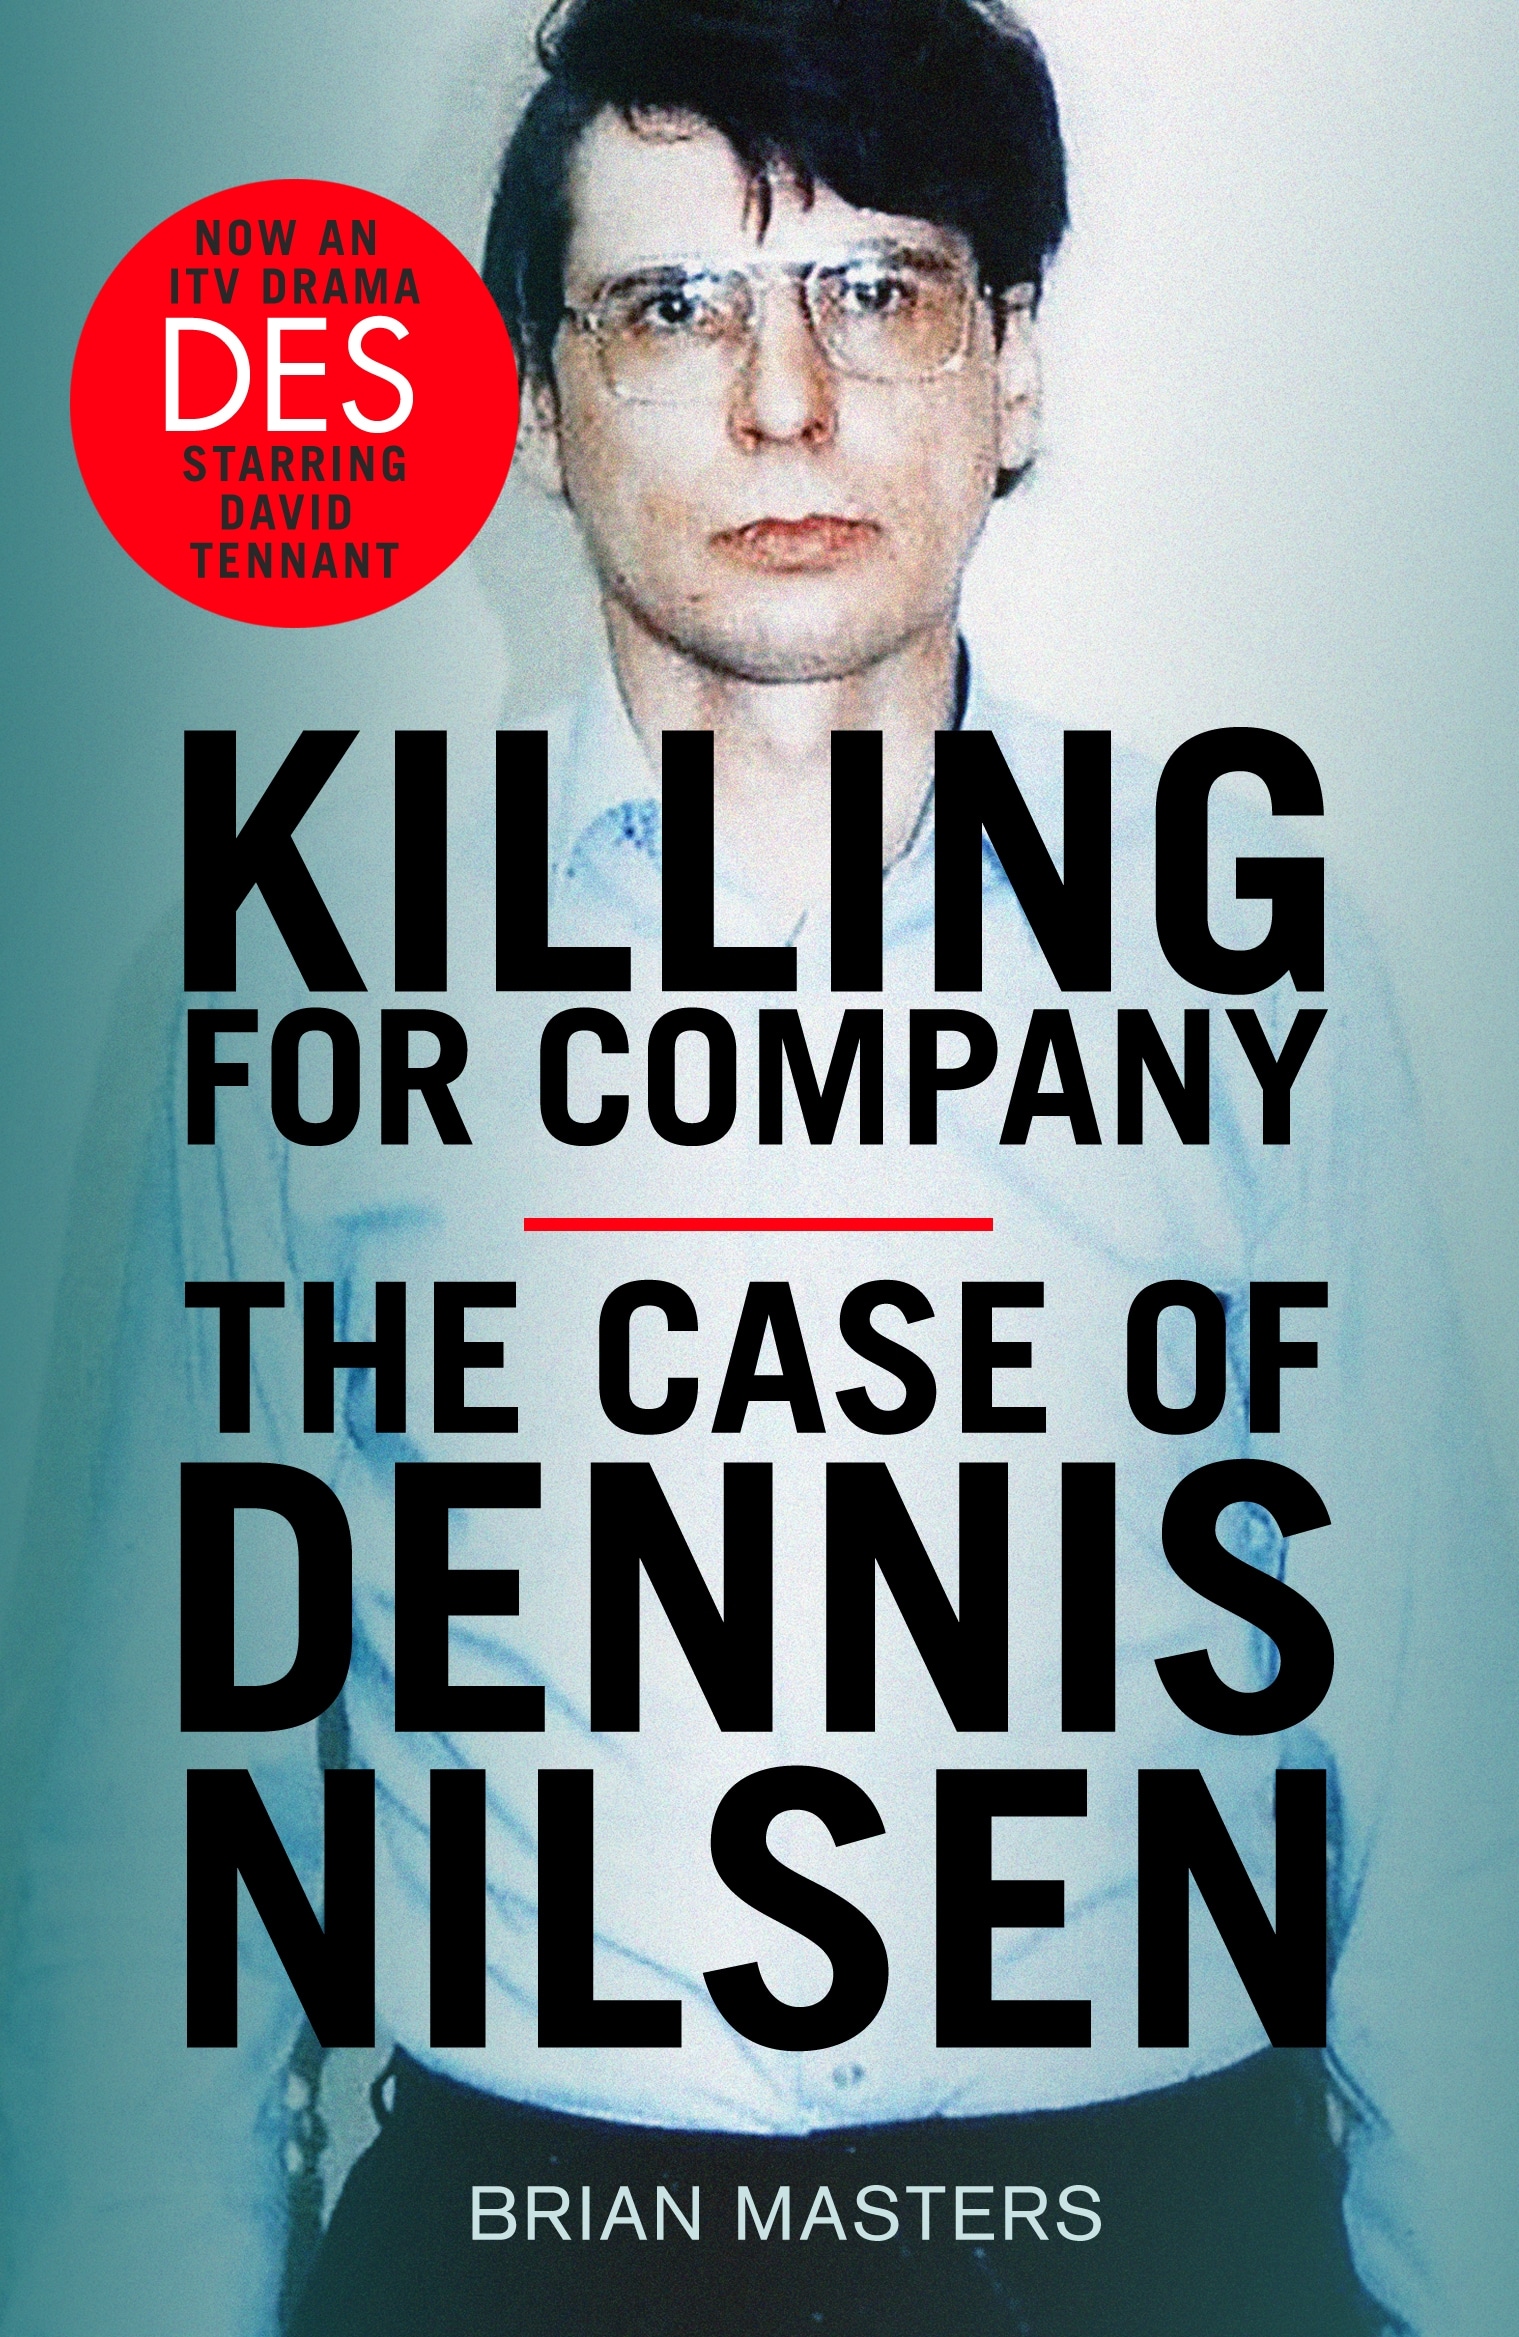 Killing For Company by Brian Masters, which features in our pick of the best true crime books